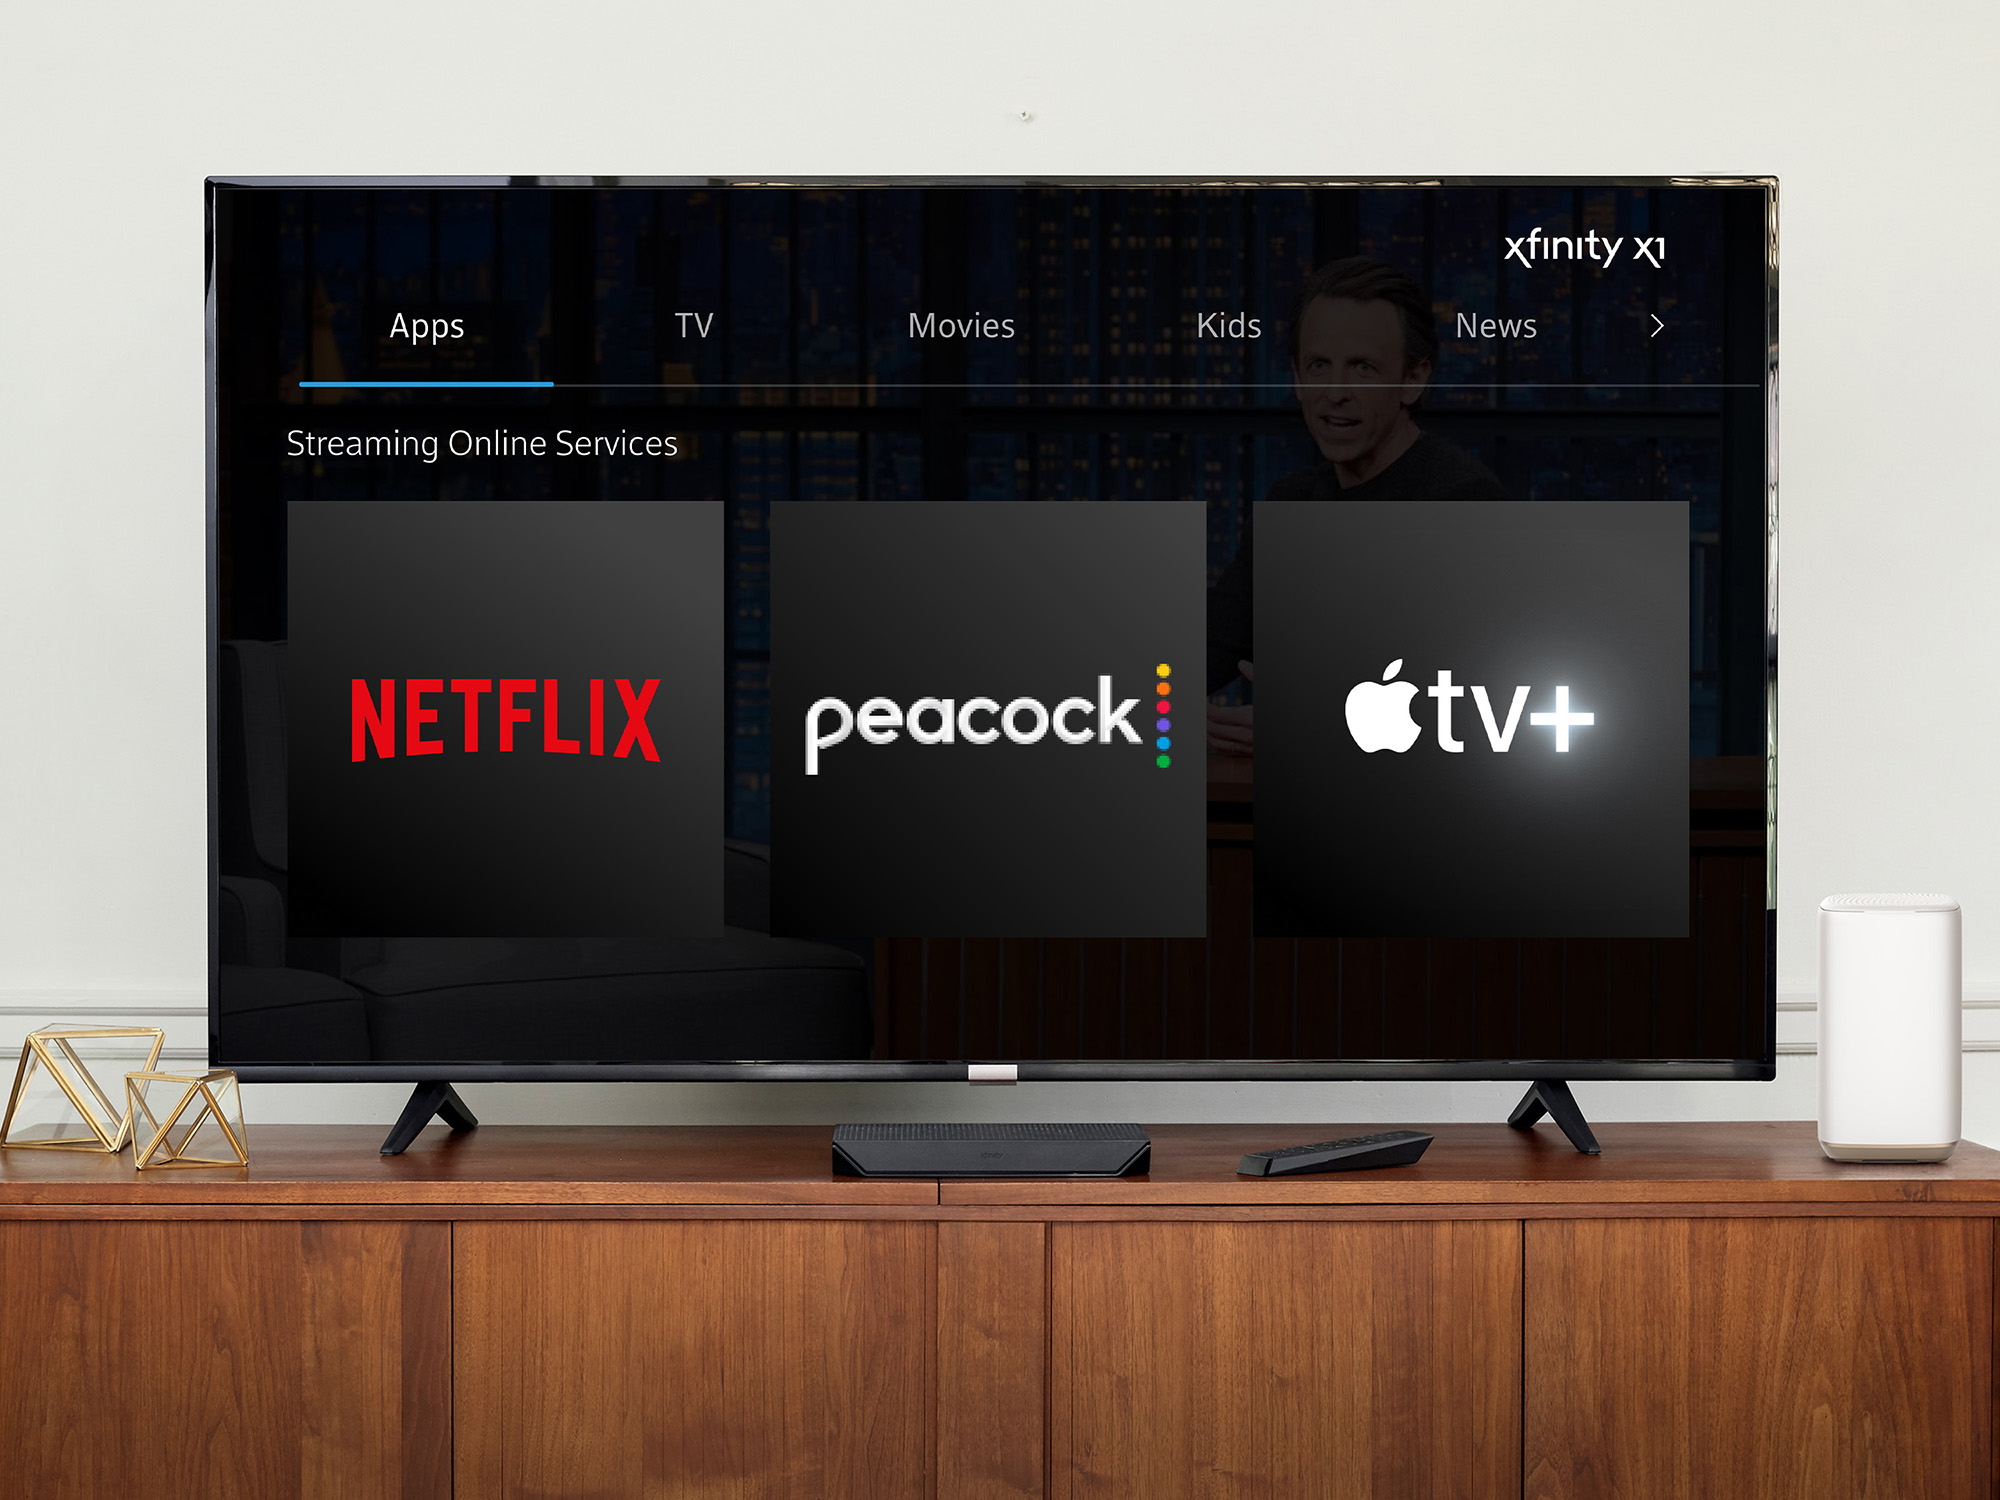 A handout image of a TV showing the logos of Netflix, Peacock, and Apple TV Plus.